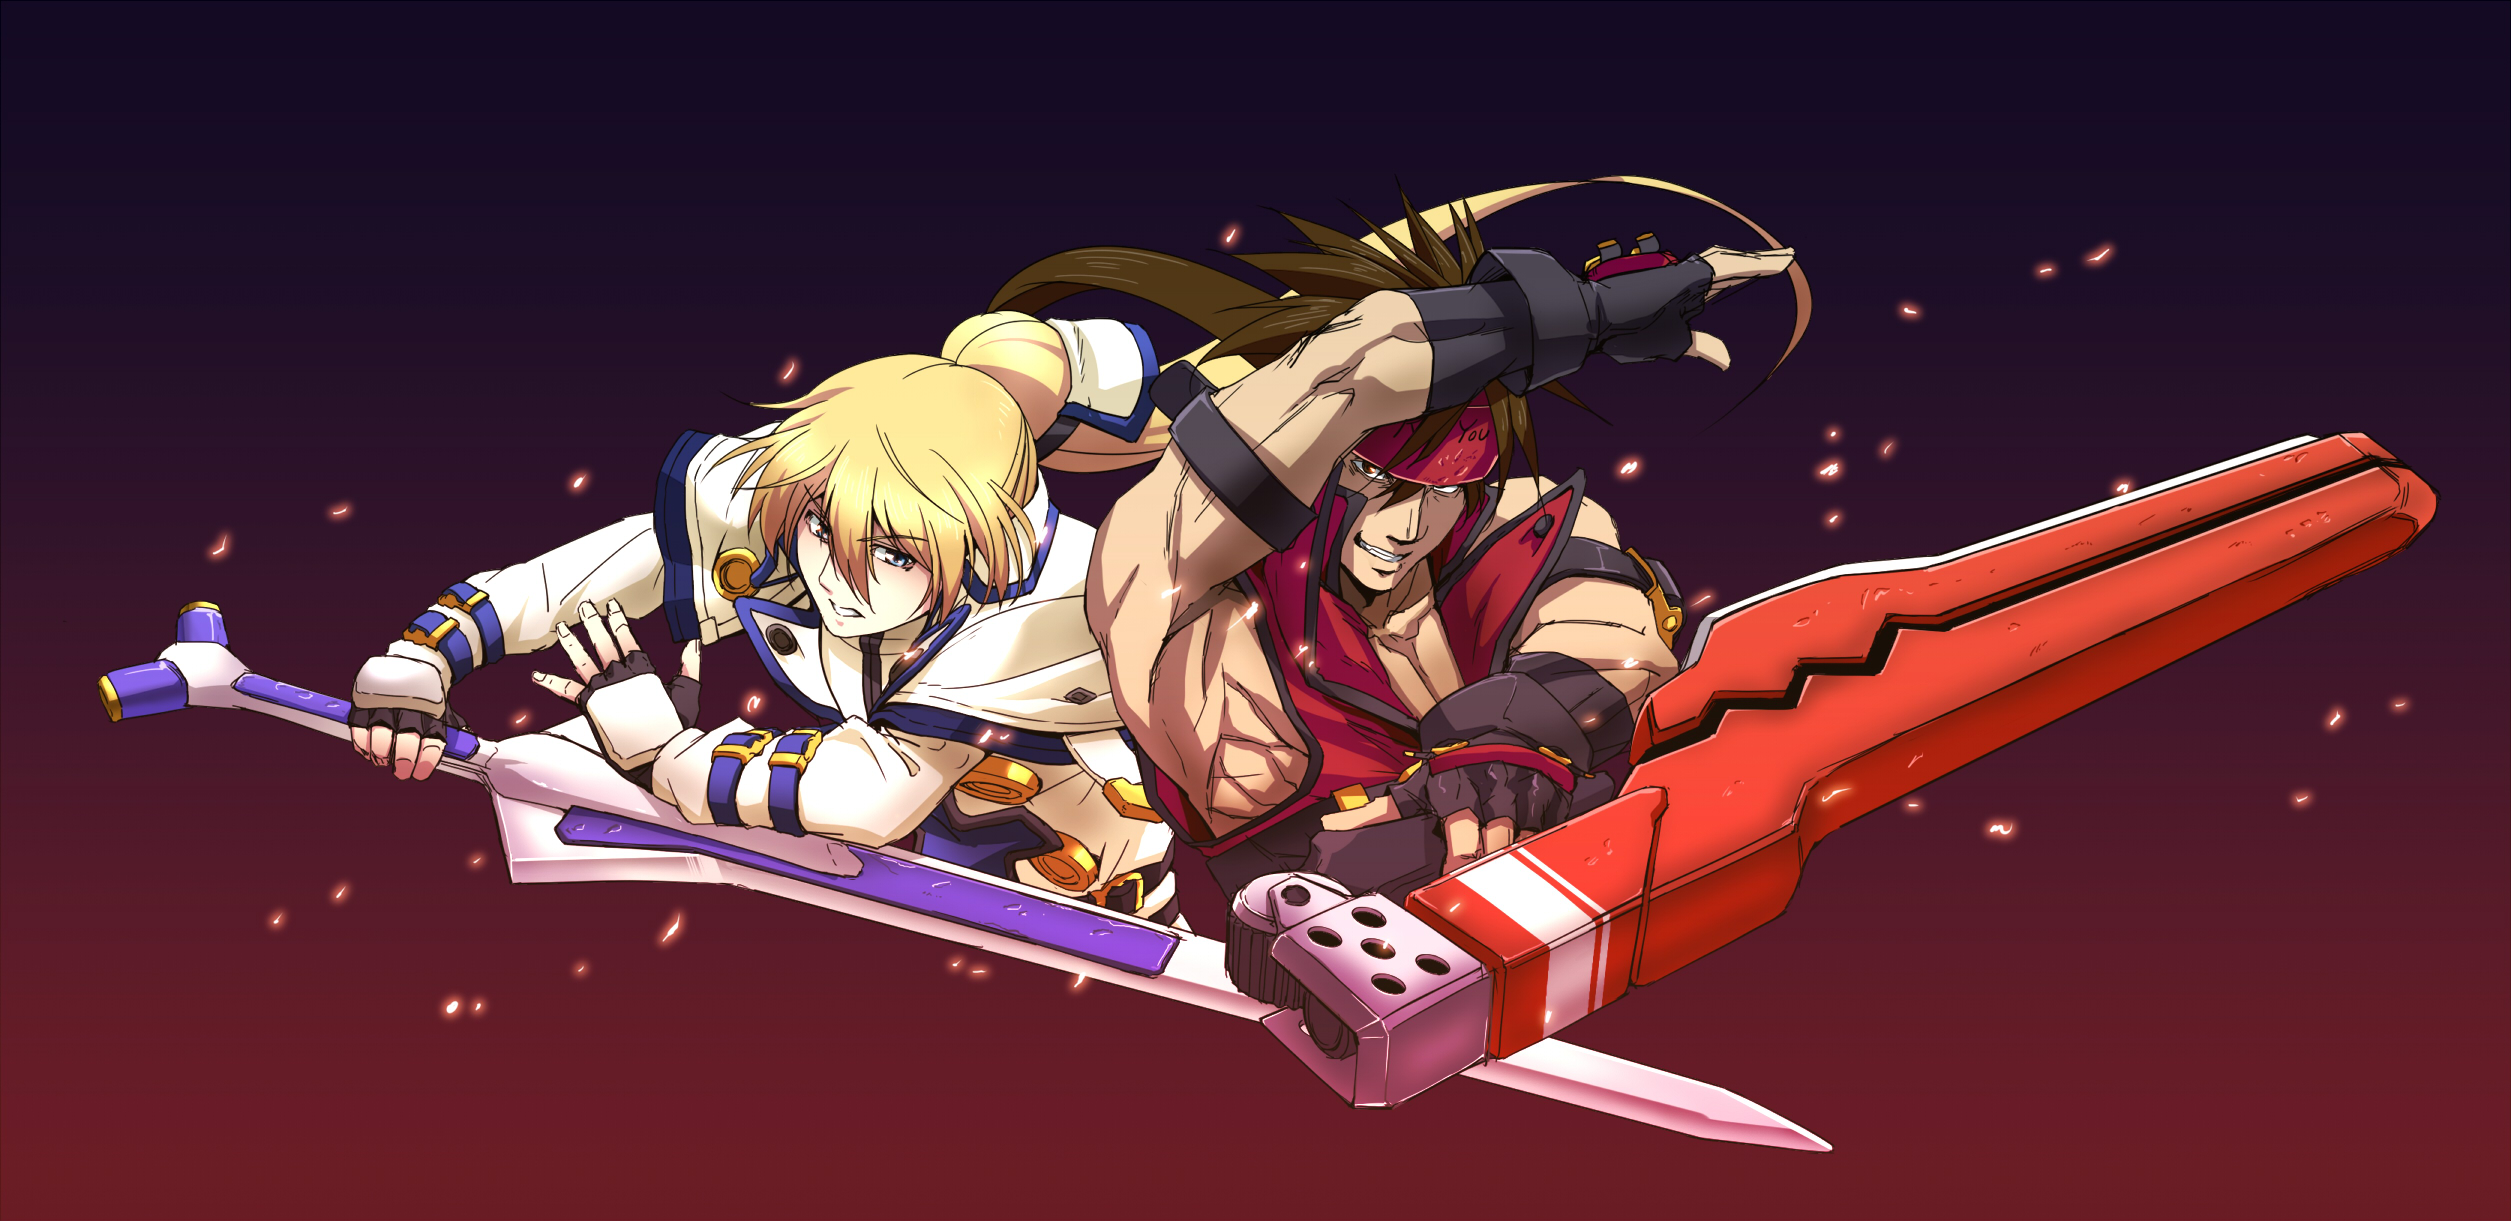 Video Game Guilty Gear Xrd -SIGN- HD Wallpaper | Background Image